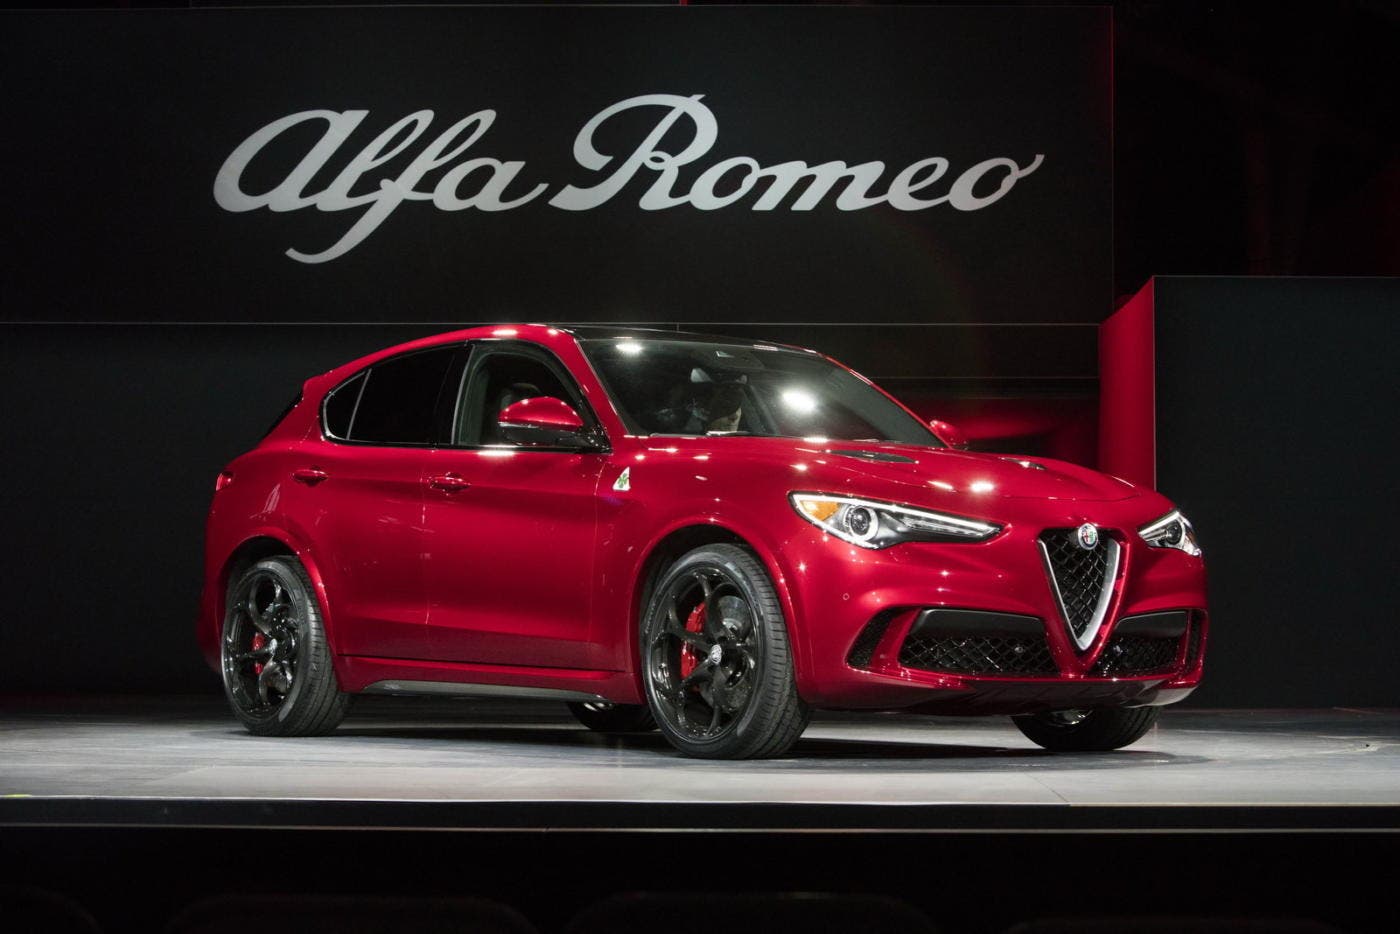 Reid Bigland, Head of Alfa Romeo, reveals the all-new 2018 Alfa Romeo Stelvio in front of global media at the 2016 L.A. Auto Show. Stelvio Quadrifoglio – the “halo” model in the lineup – continues to highlight Alfa Romeo’s performance and motorsport expertise with a best-in-class, Ferrari-derived 505 horsepower engine, powering it from 0-60 mph in just 3.9 seconds with a top speed of 177 mph. On sale in 2017, all Stelvio models come standard with the innovative Q4 all-wheel-drive-system.